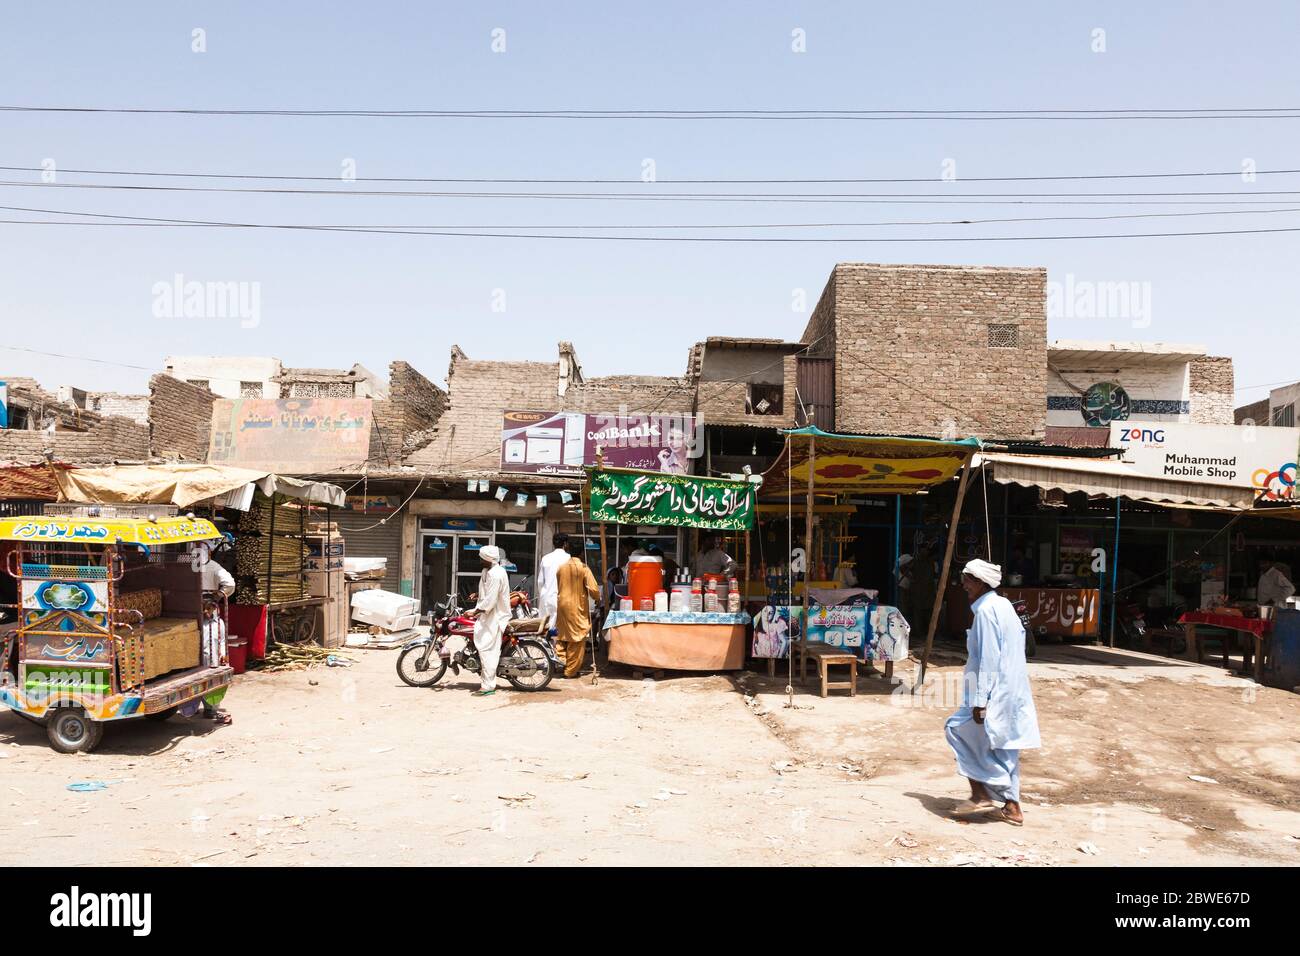 Down town of Uch, Uch Sharif, Bahawalpur district, Punjab Province, Pakistan, South Asia, Asia Stock Photo